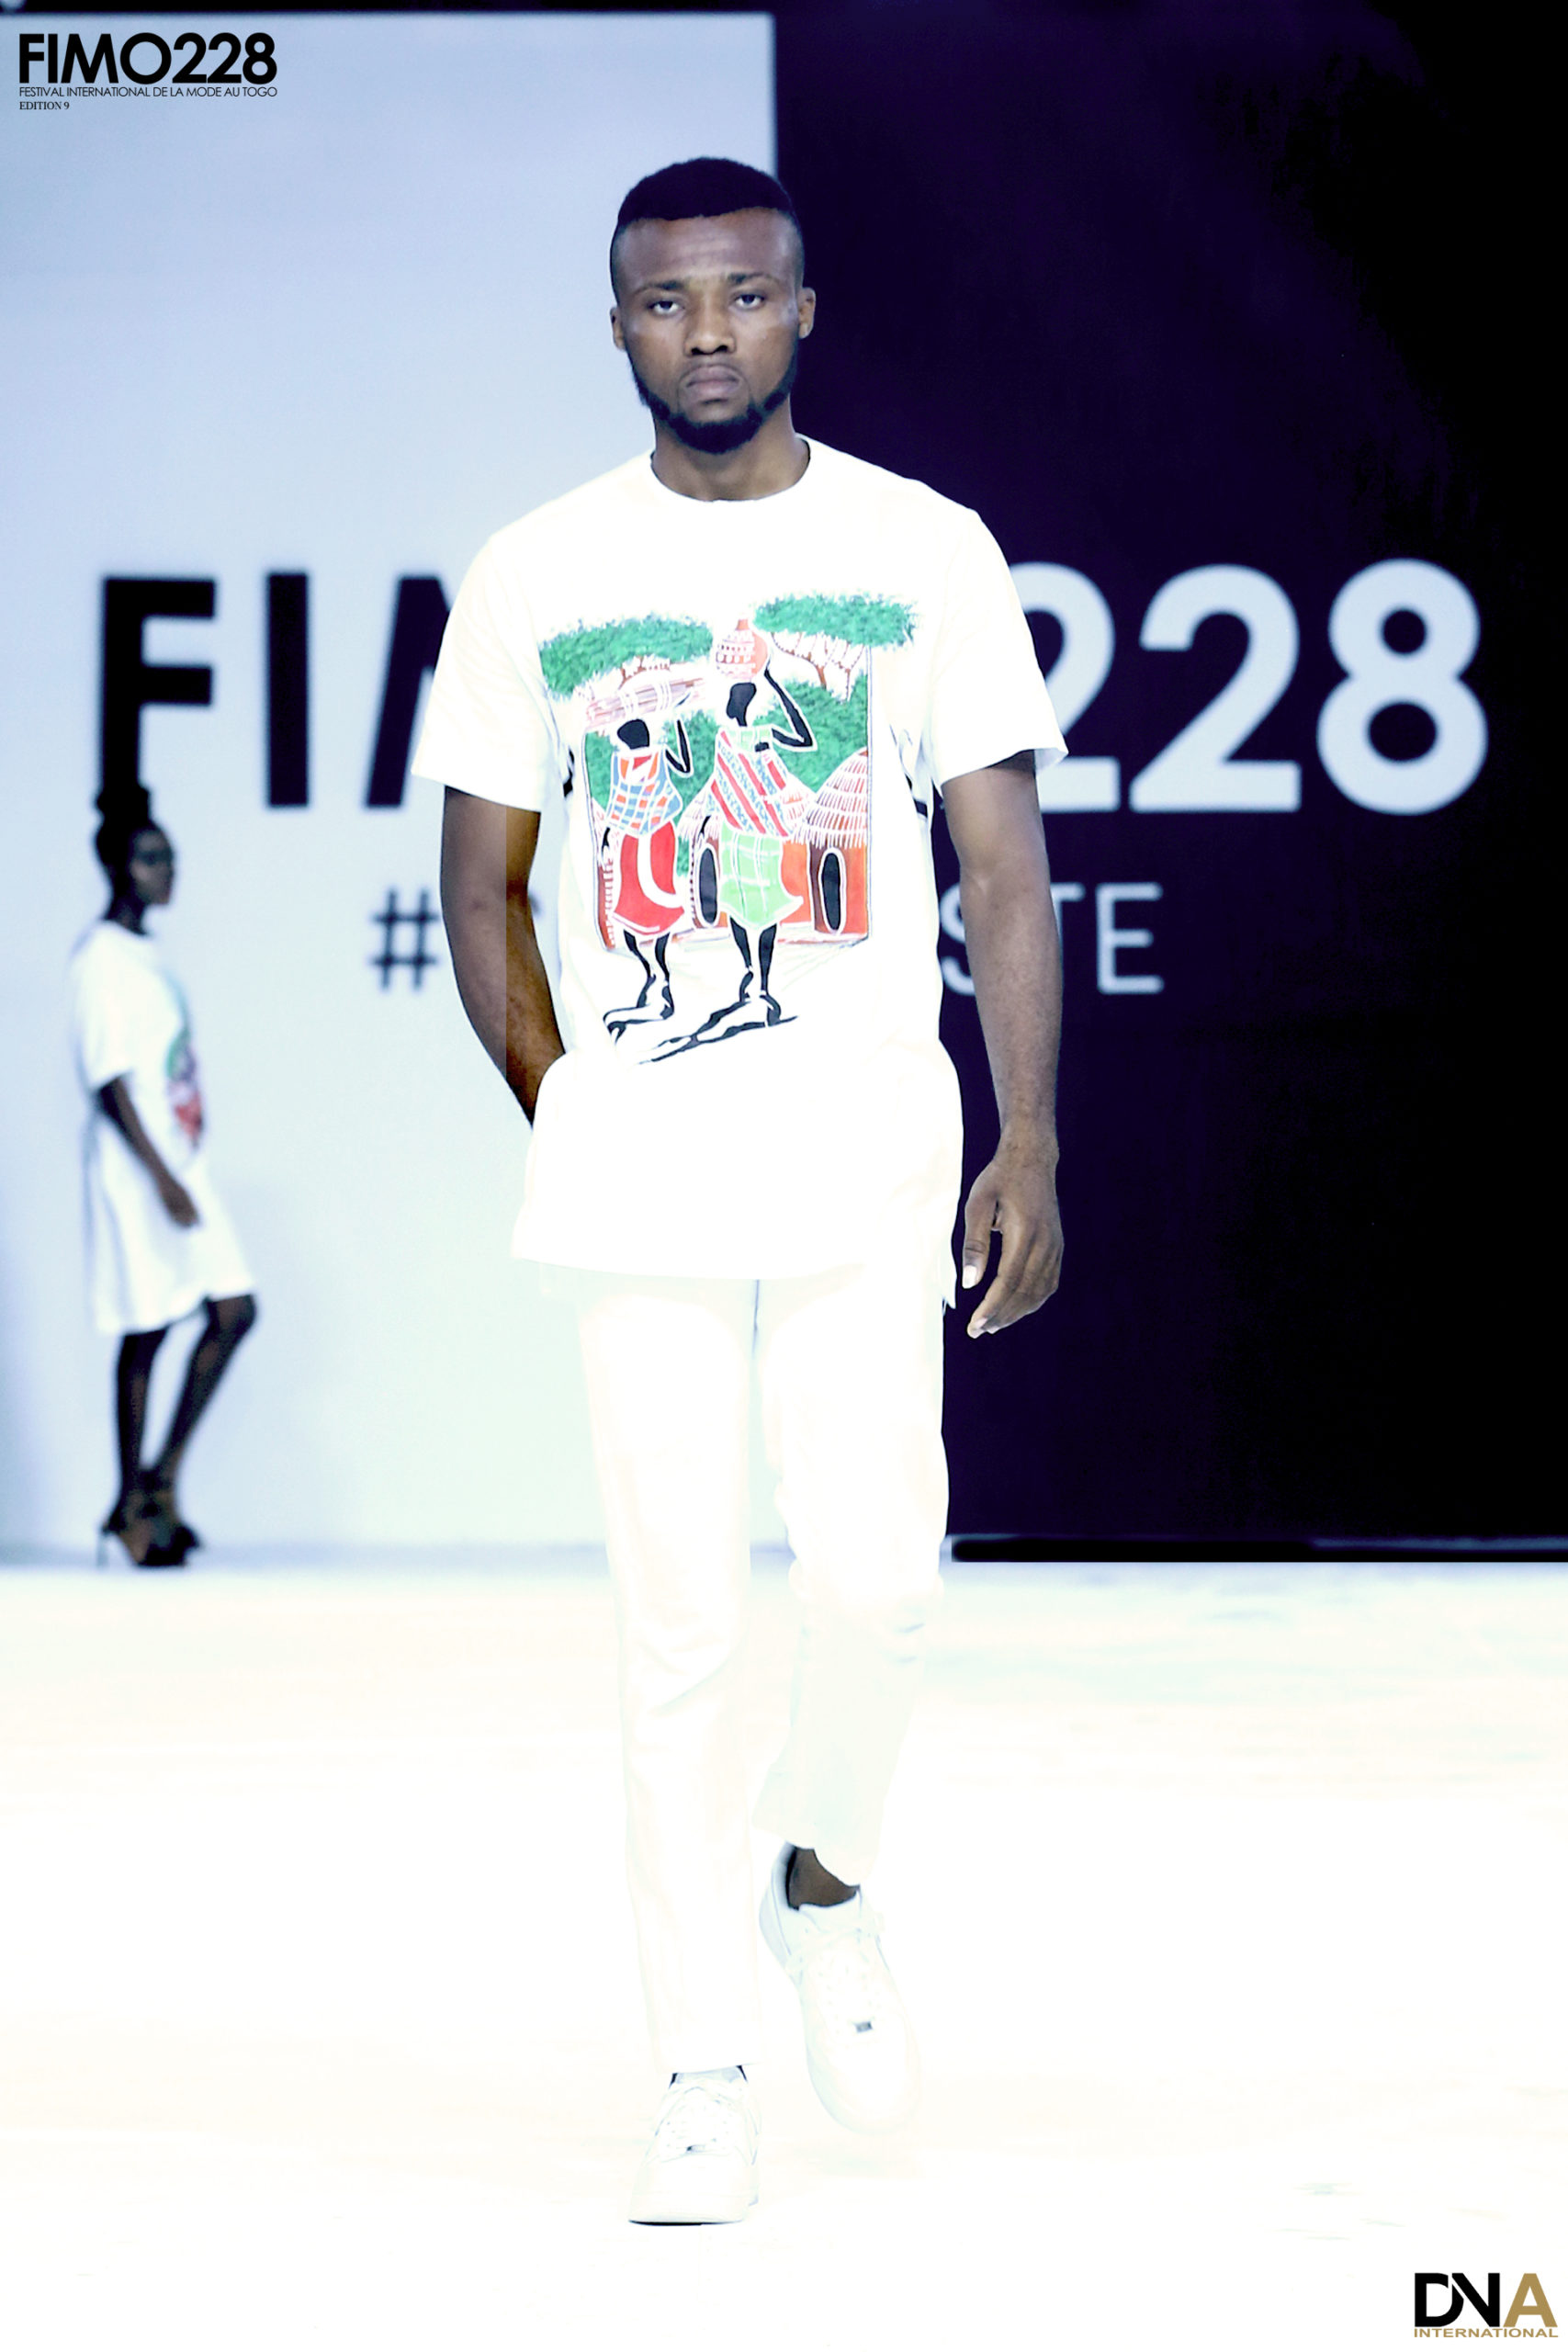 DK STYLE PRESENTS HIS NEW COLLECTION DURING FIMO 228 EDITION 9